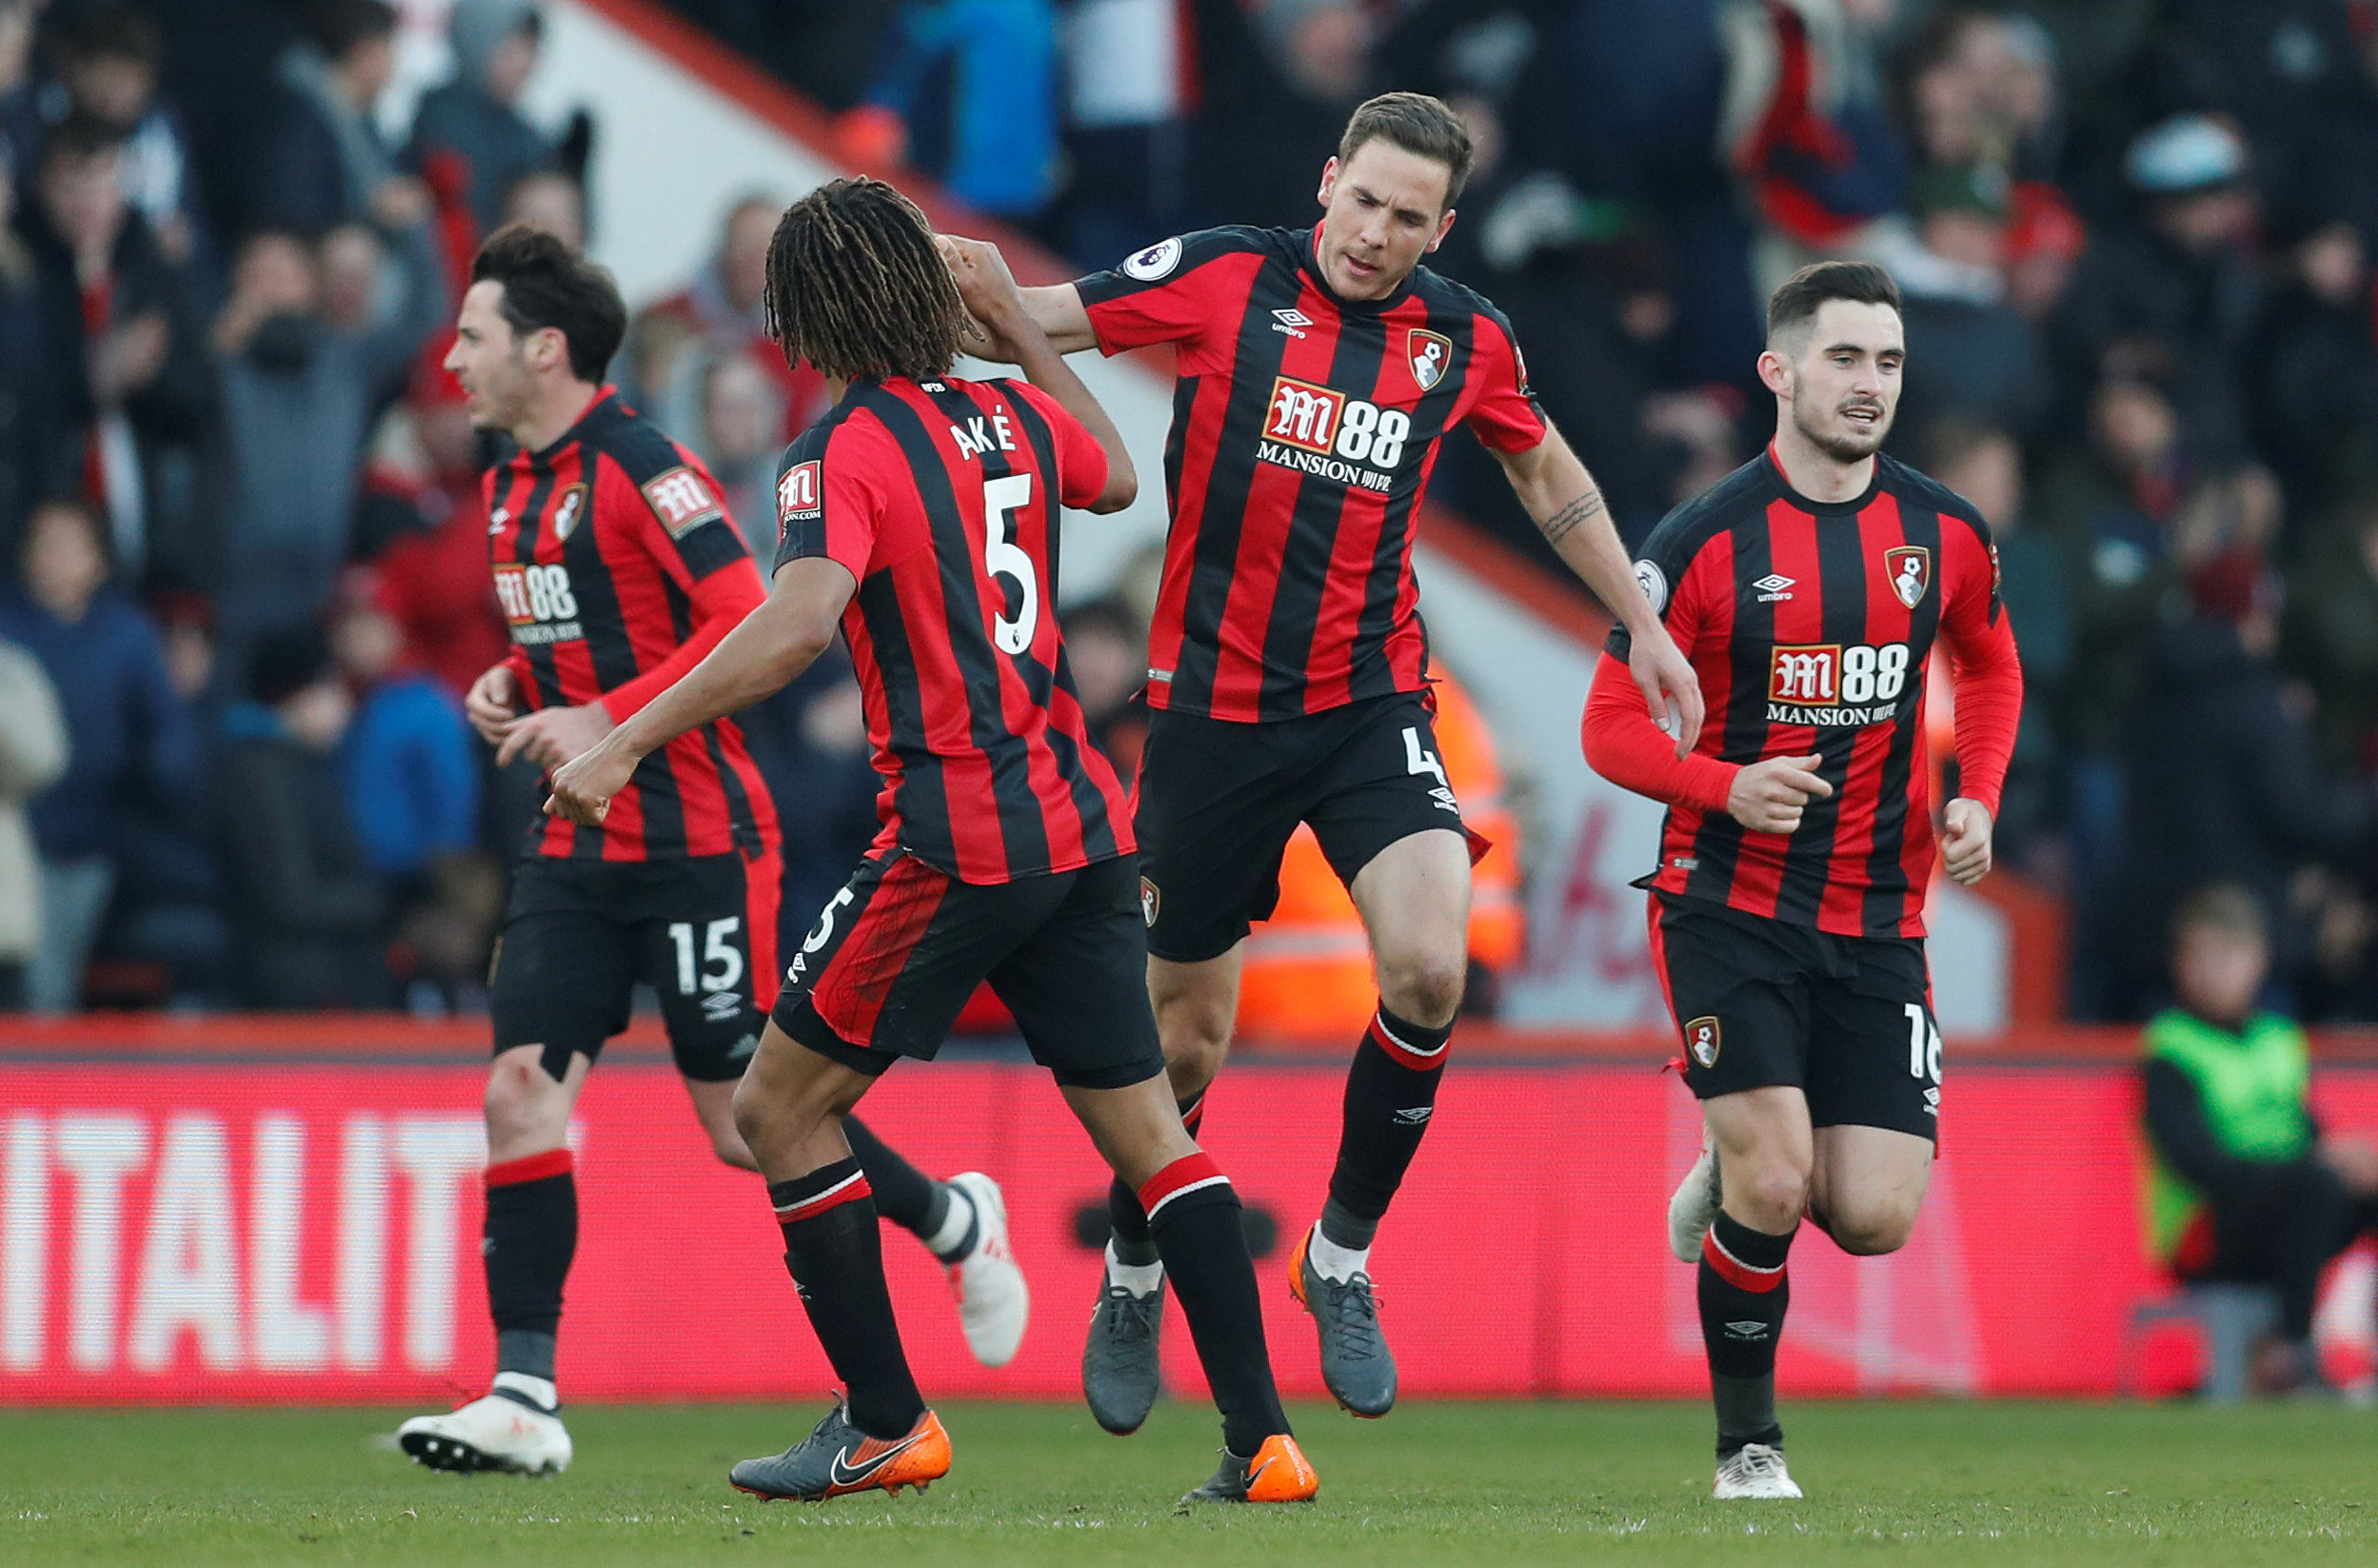 Football: Gosling stuns Newcastle to snatch draw for Bournemouth